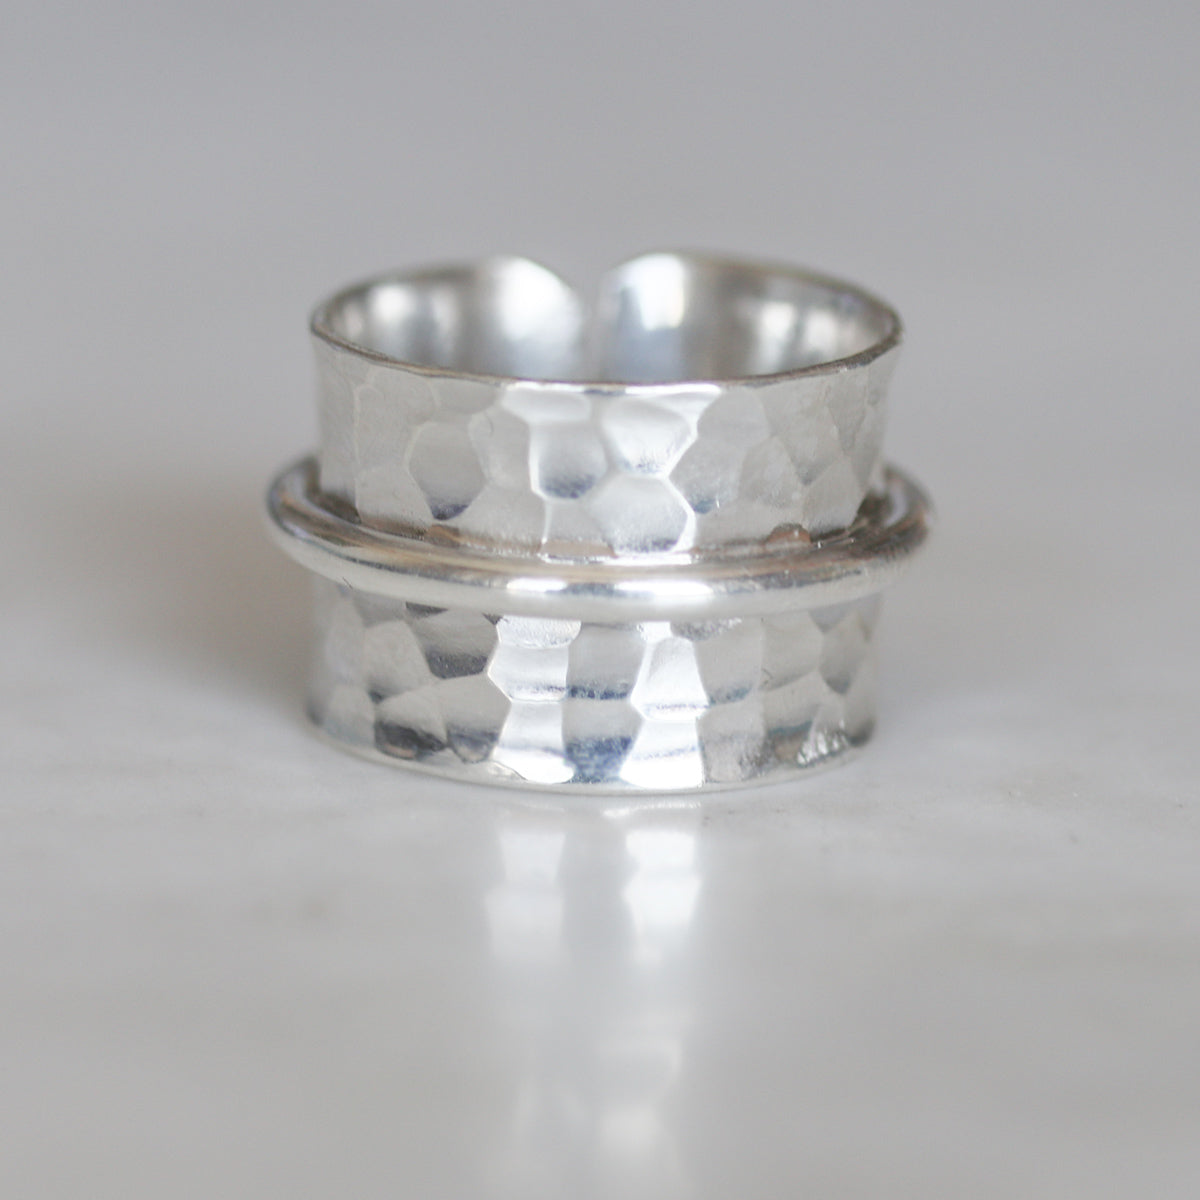 Wide Sterling Silver Toe Ring | Hammered, Adjustable, Thick | Recycled Hammered